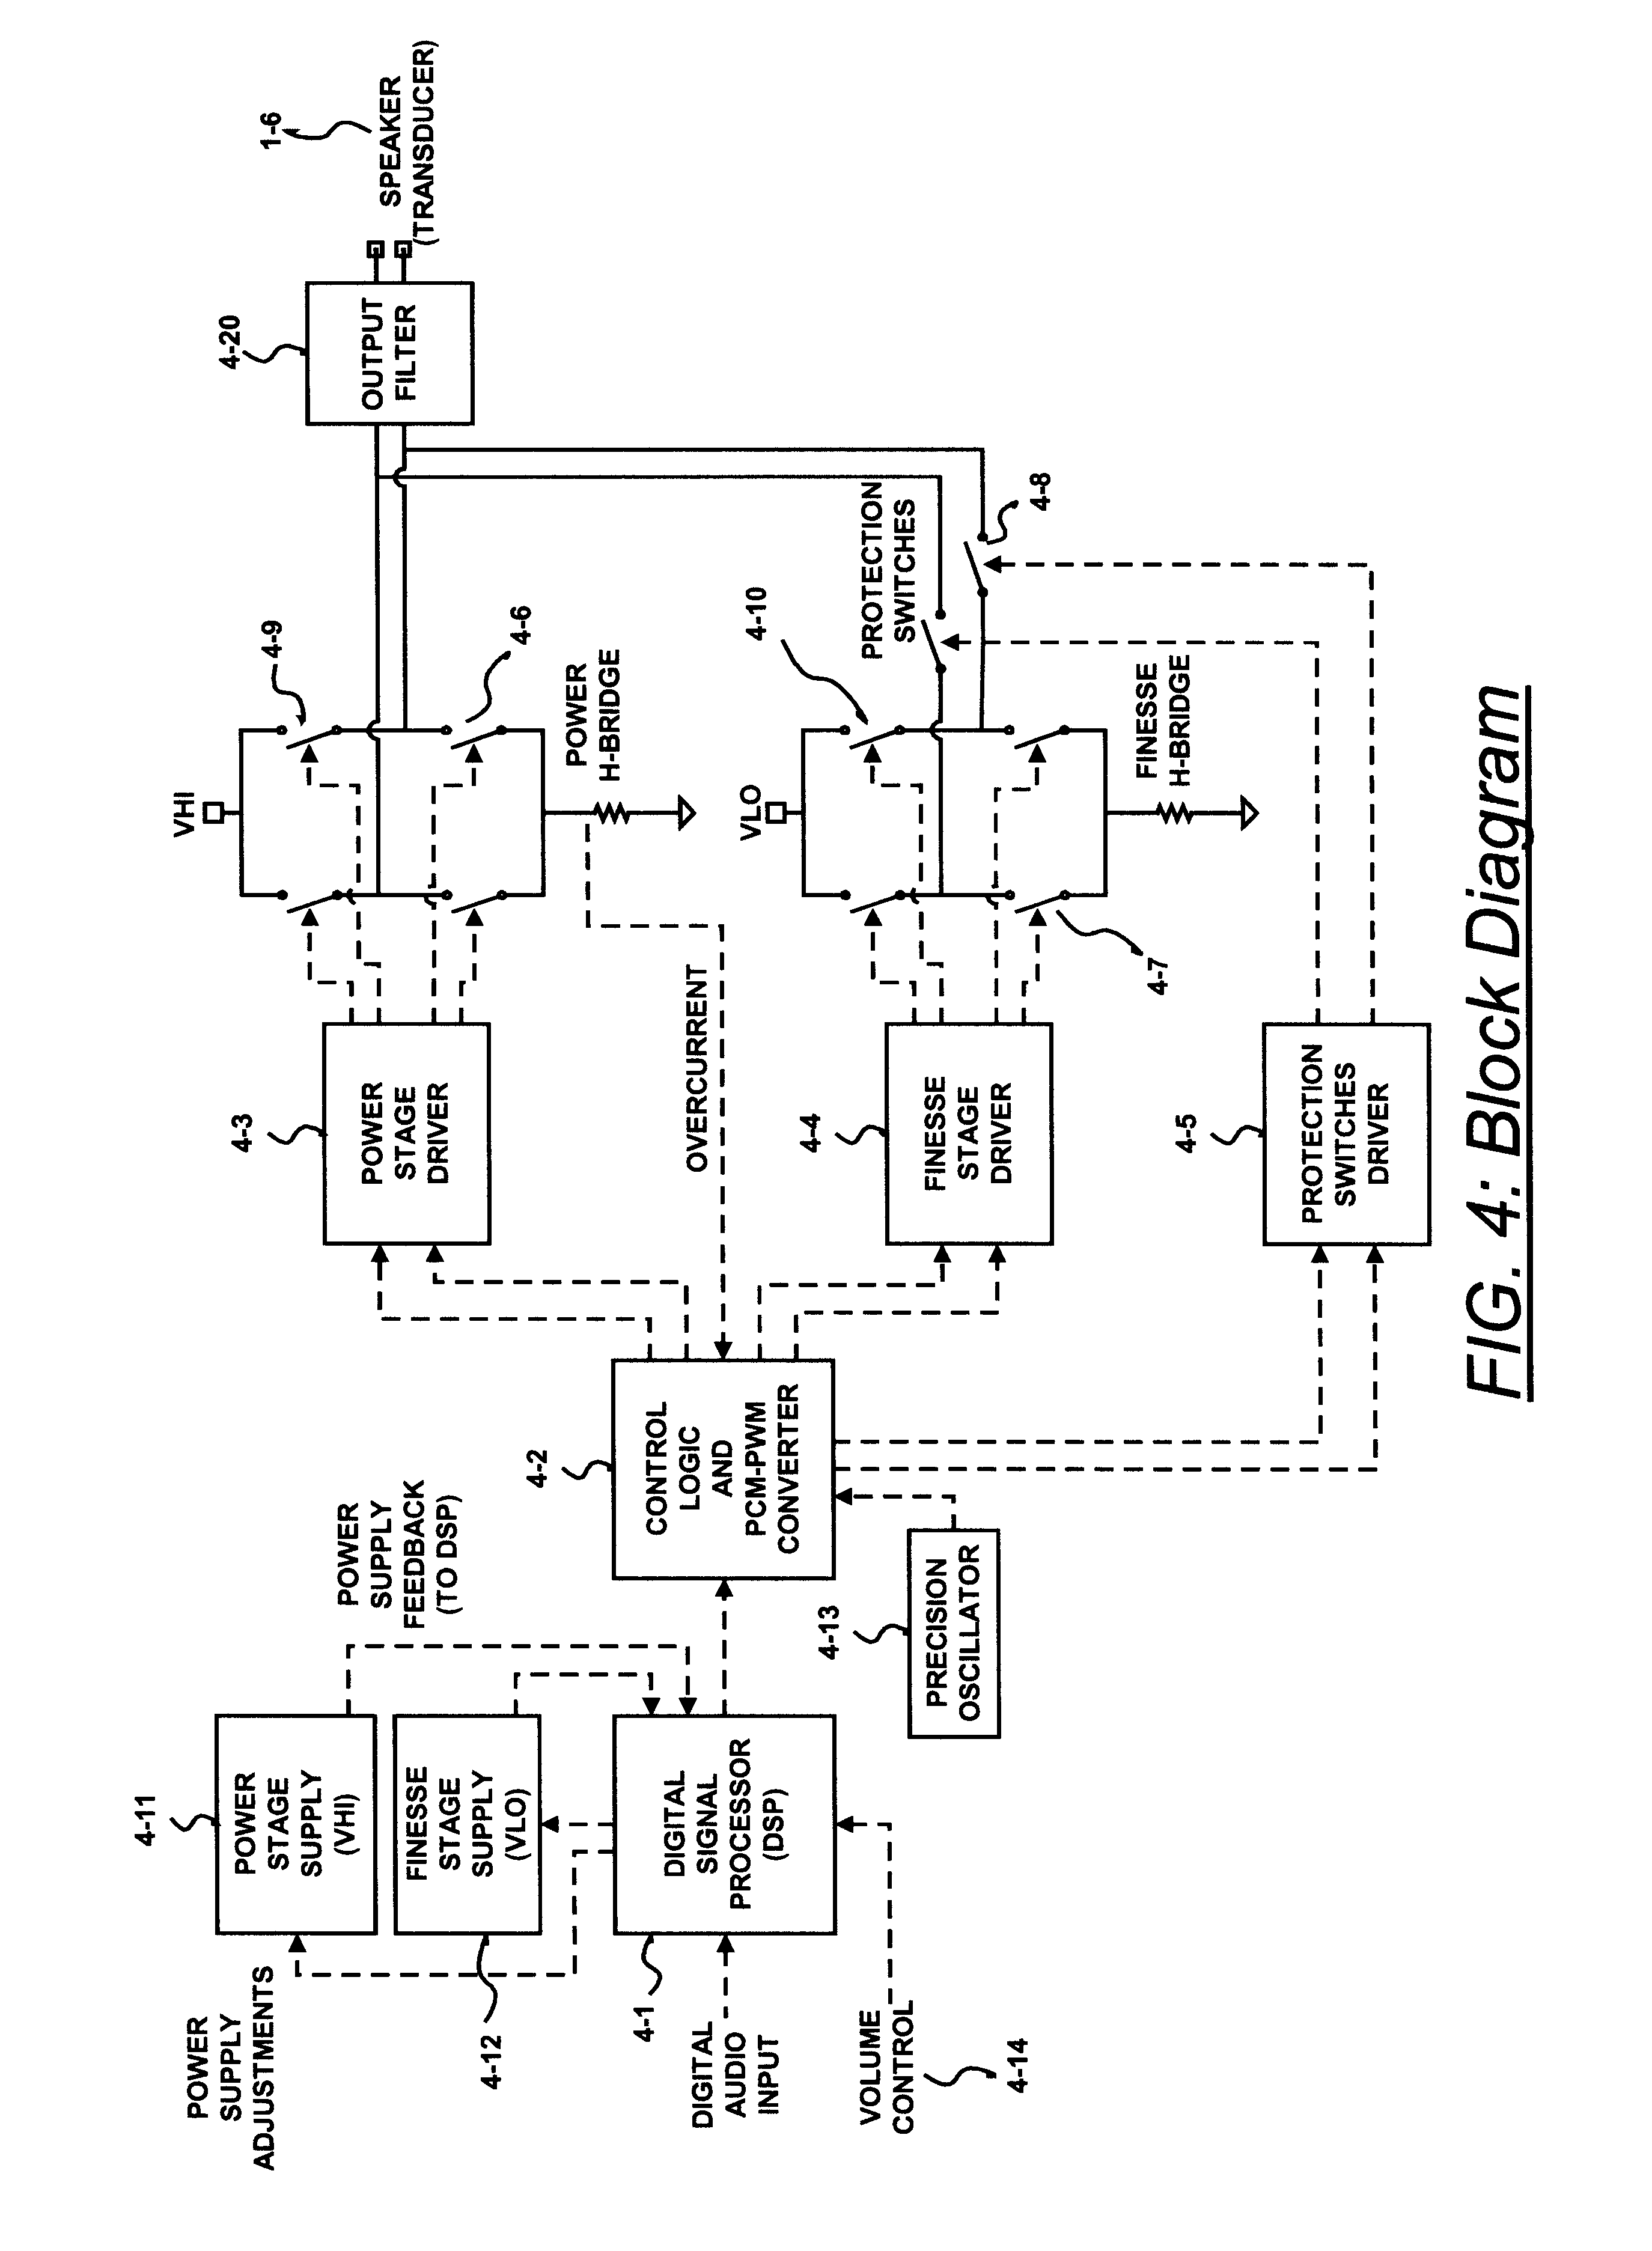 Digital amplifier with improved performance